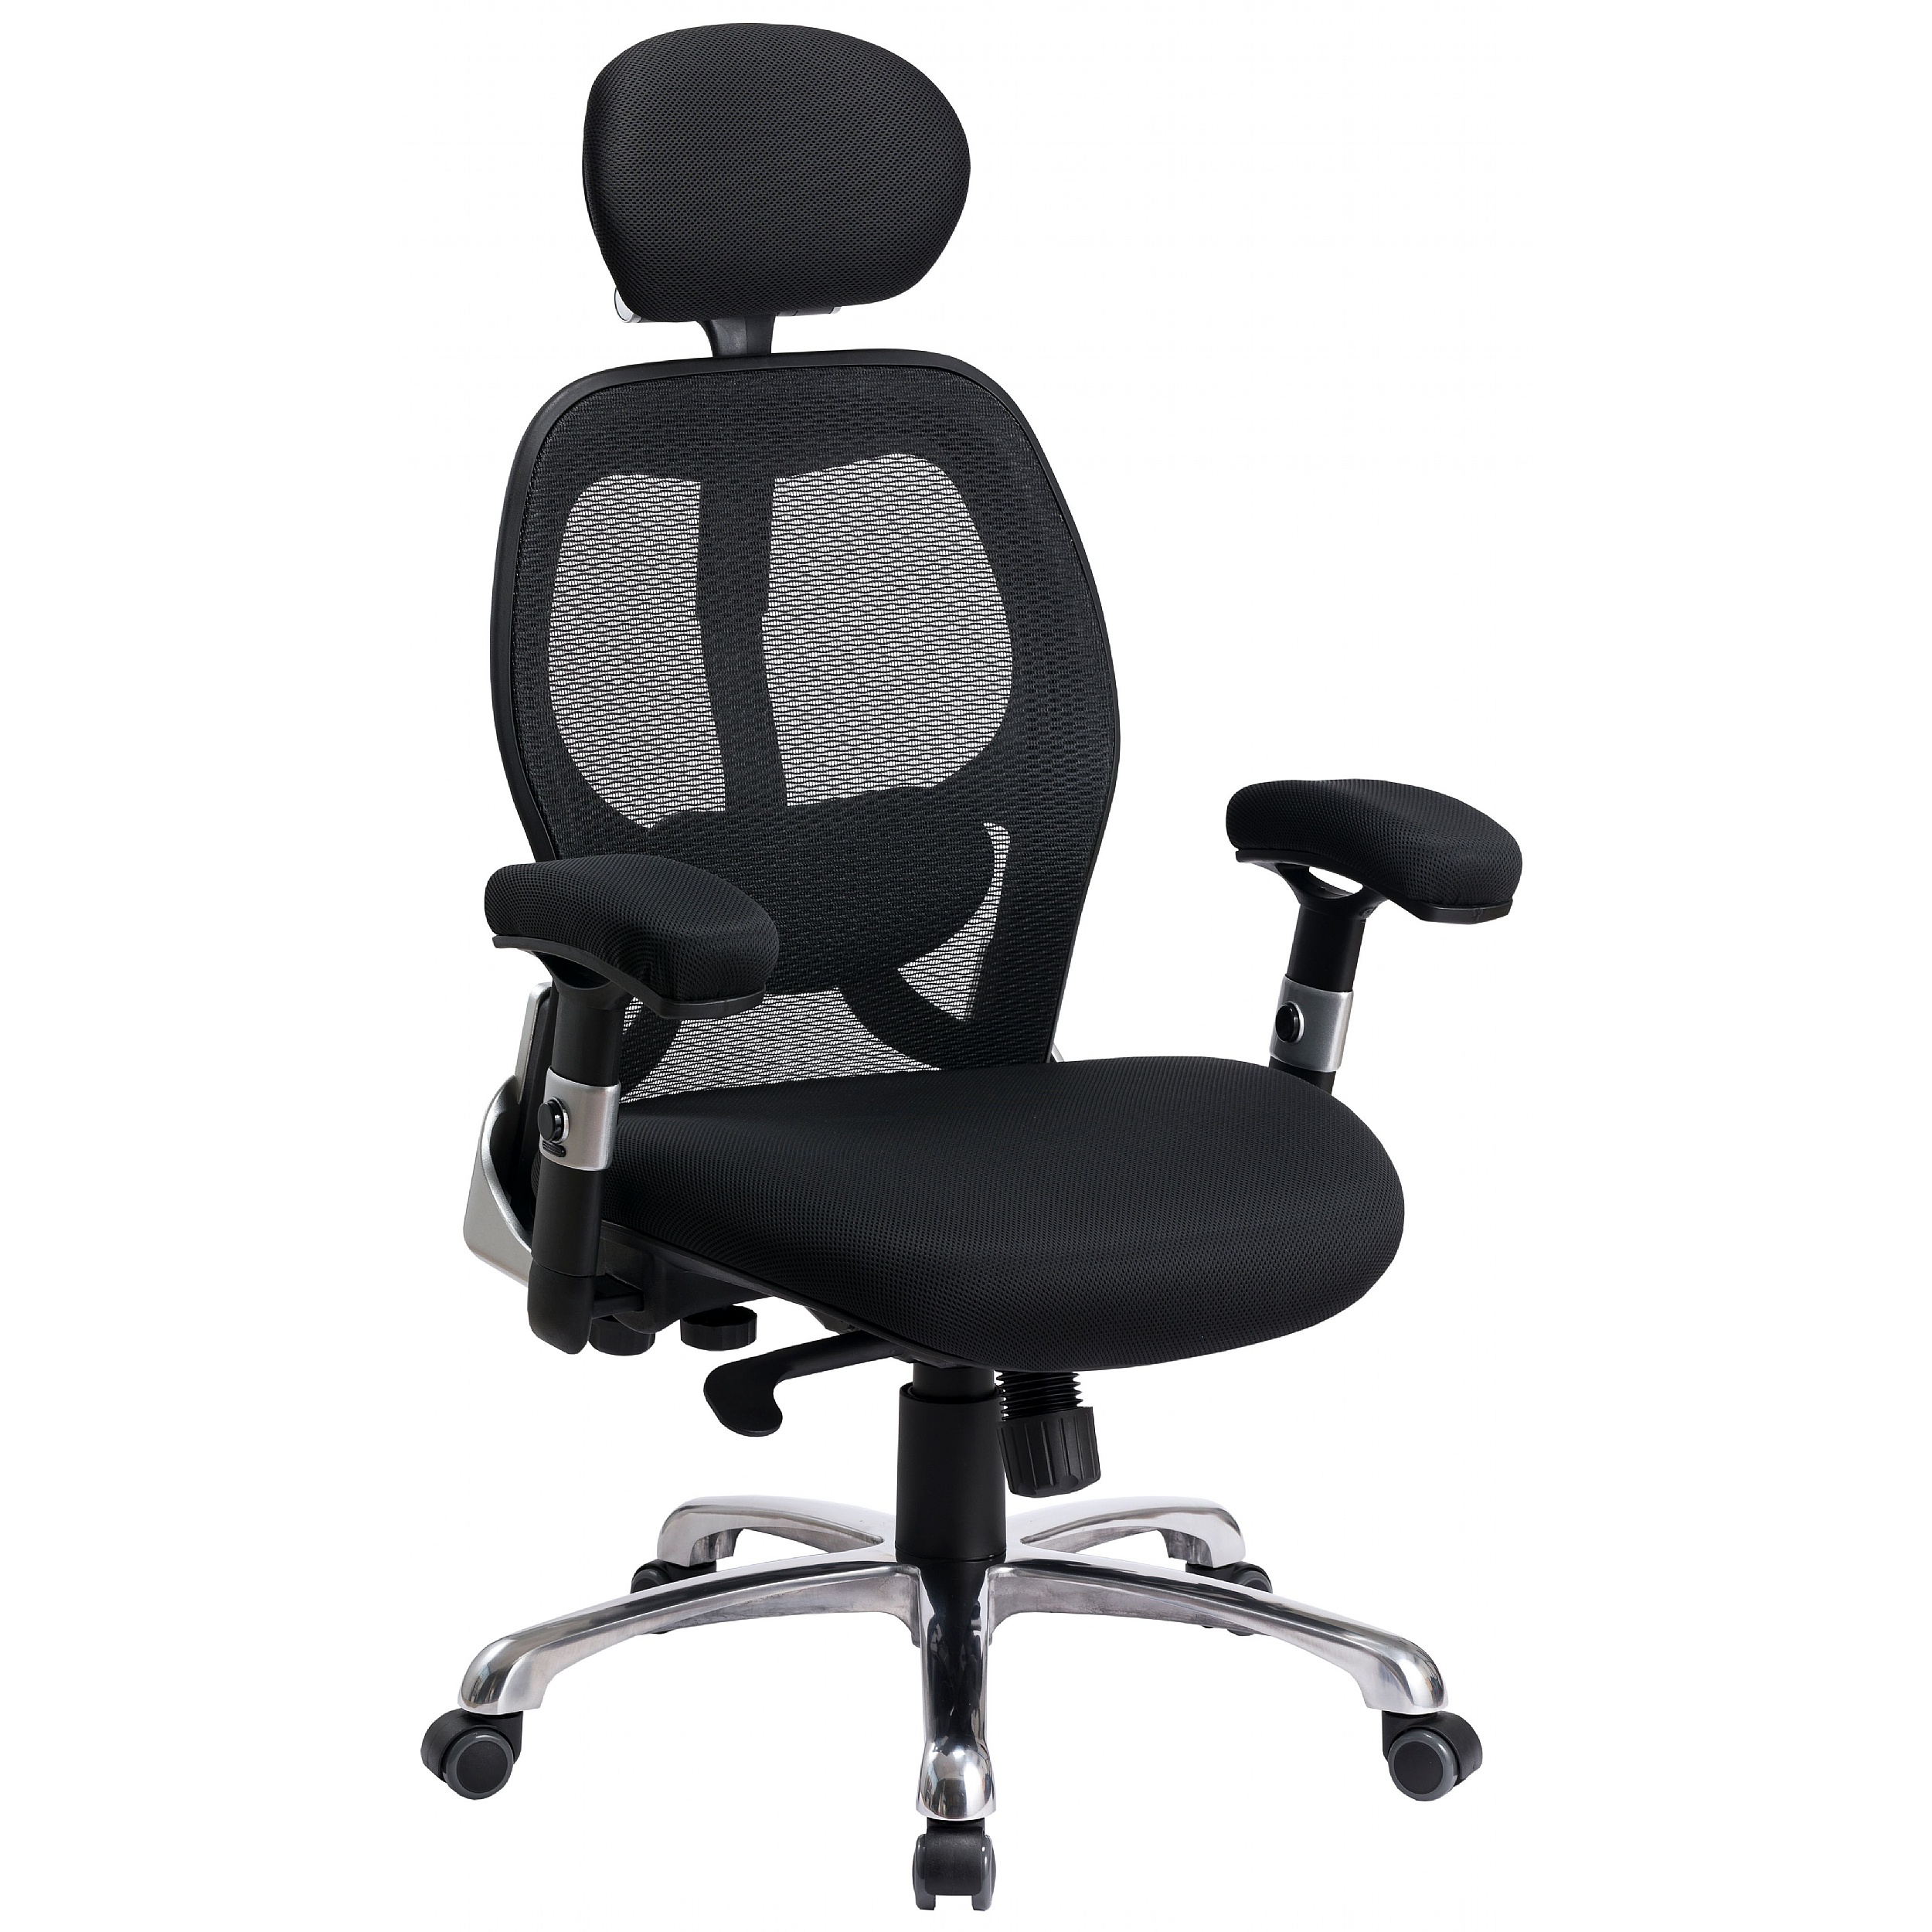 Ergo Mesh 24 Hour Office Chair from our Mesh Office Chairs range.